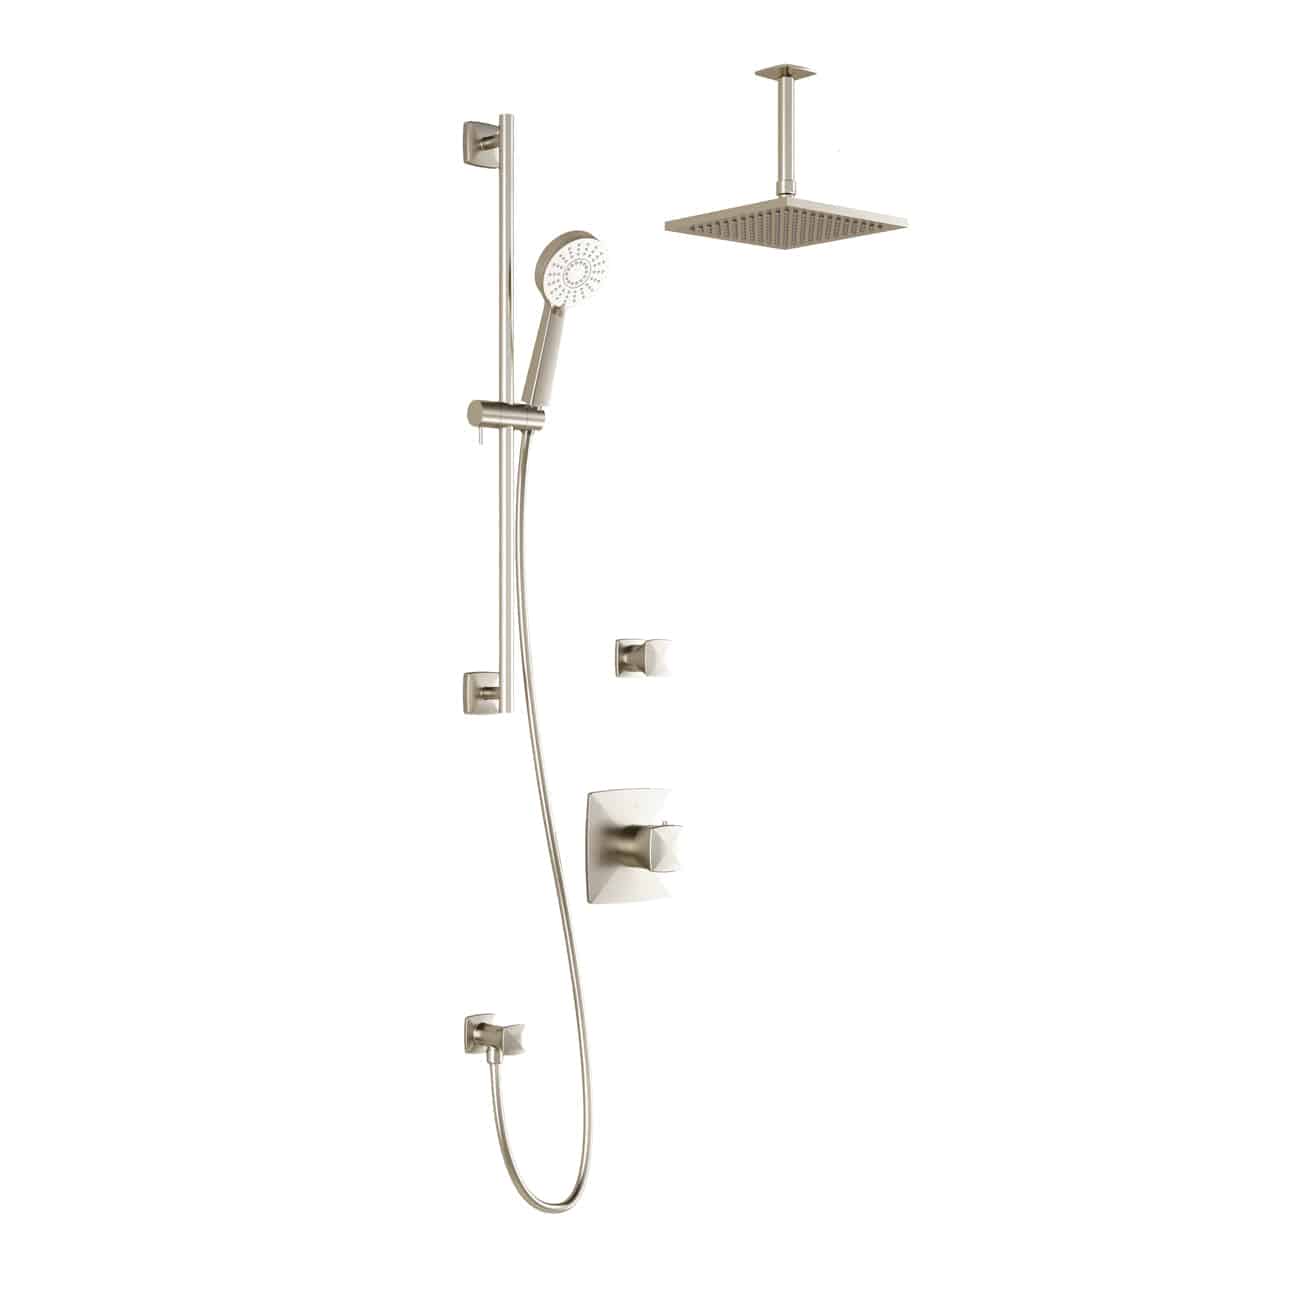 Kalia UMANI T2 : AQUATONIK T/P Shower System with Vertical Ceiling Arm and 8" Rain Shower Head- Brushed Nickel PVD